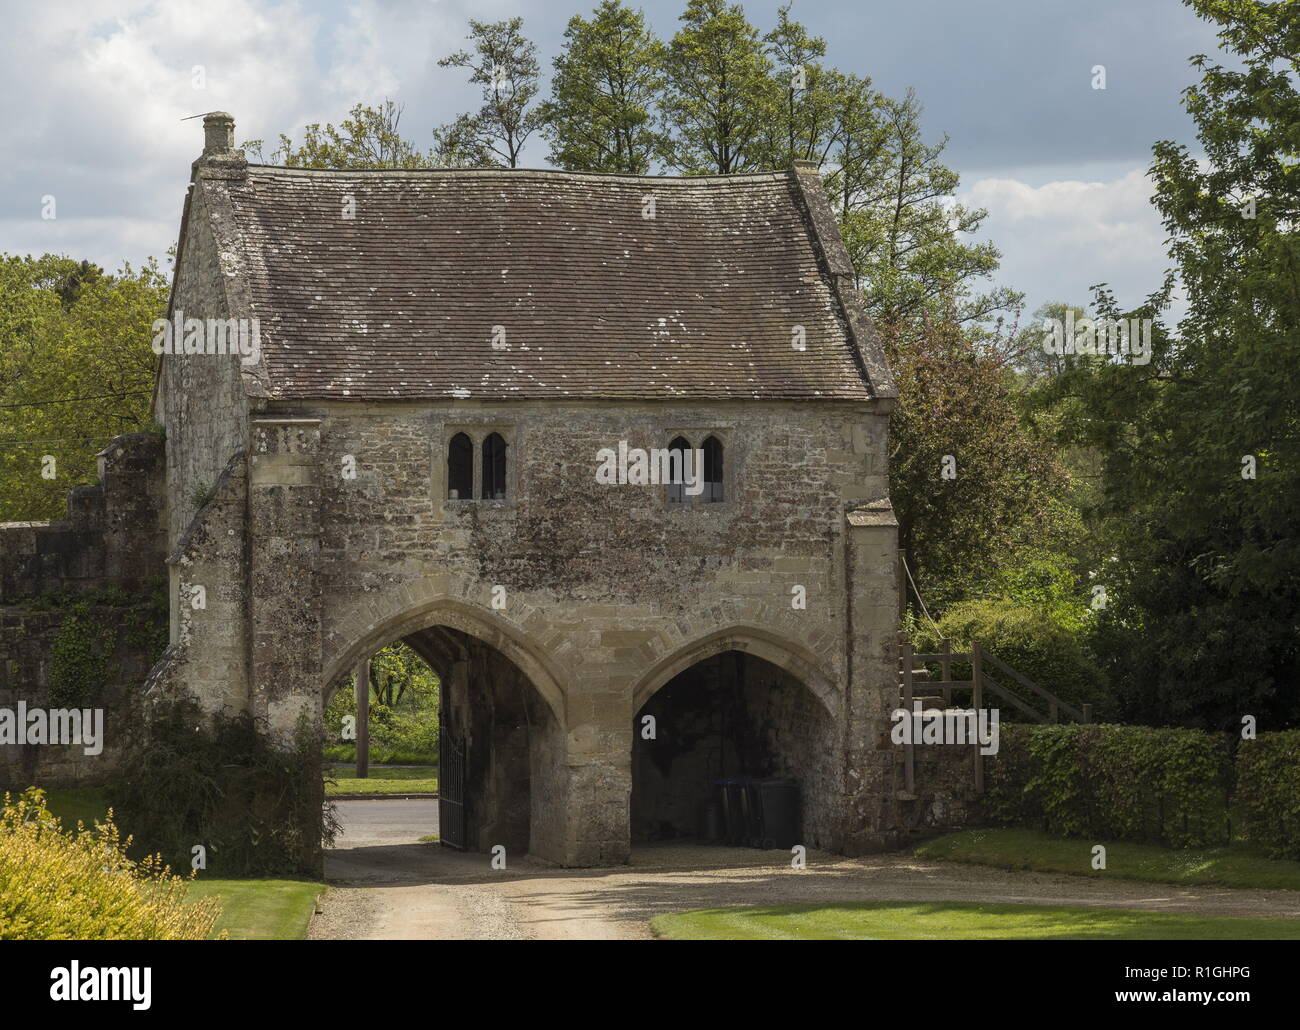 Medieval monastic gateway at Place Farm, Tisbury, Wilts. Grade 1 listed building. Stock Photo